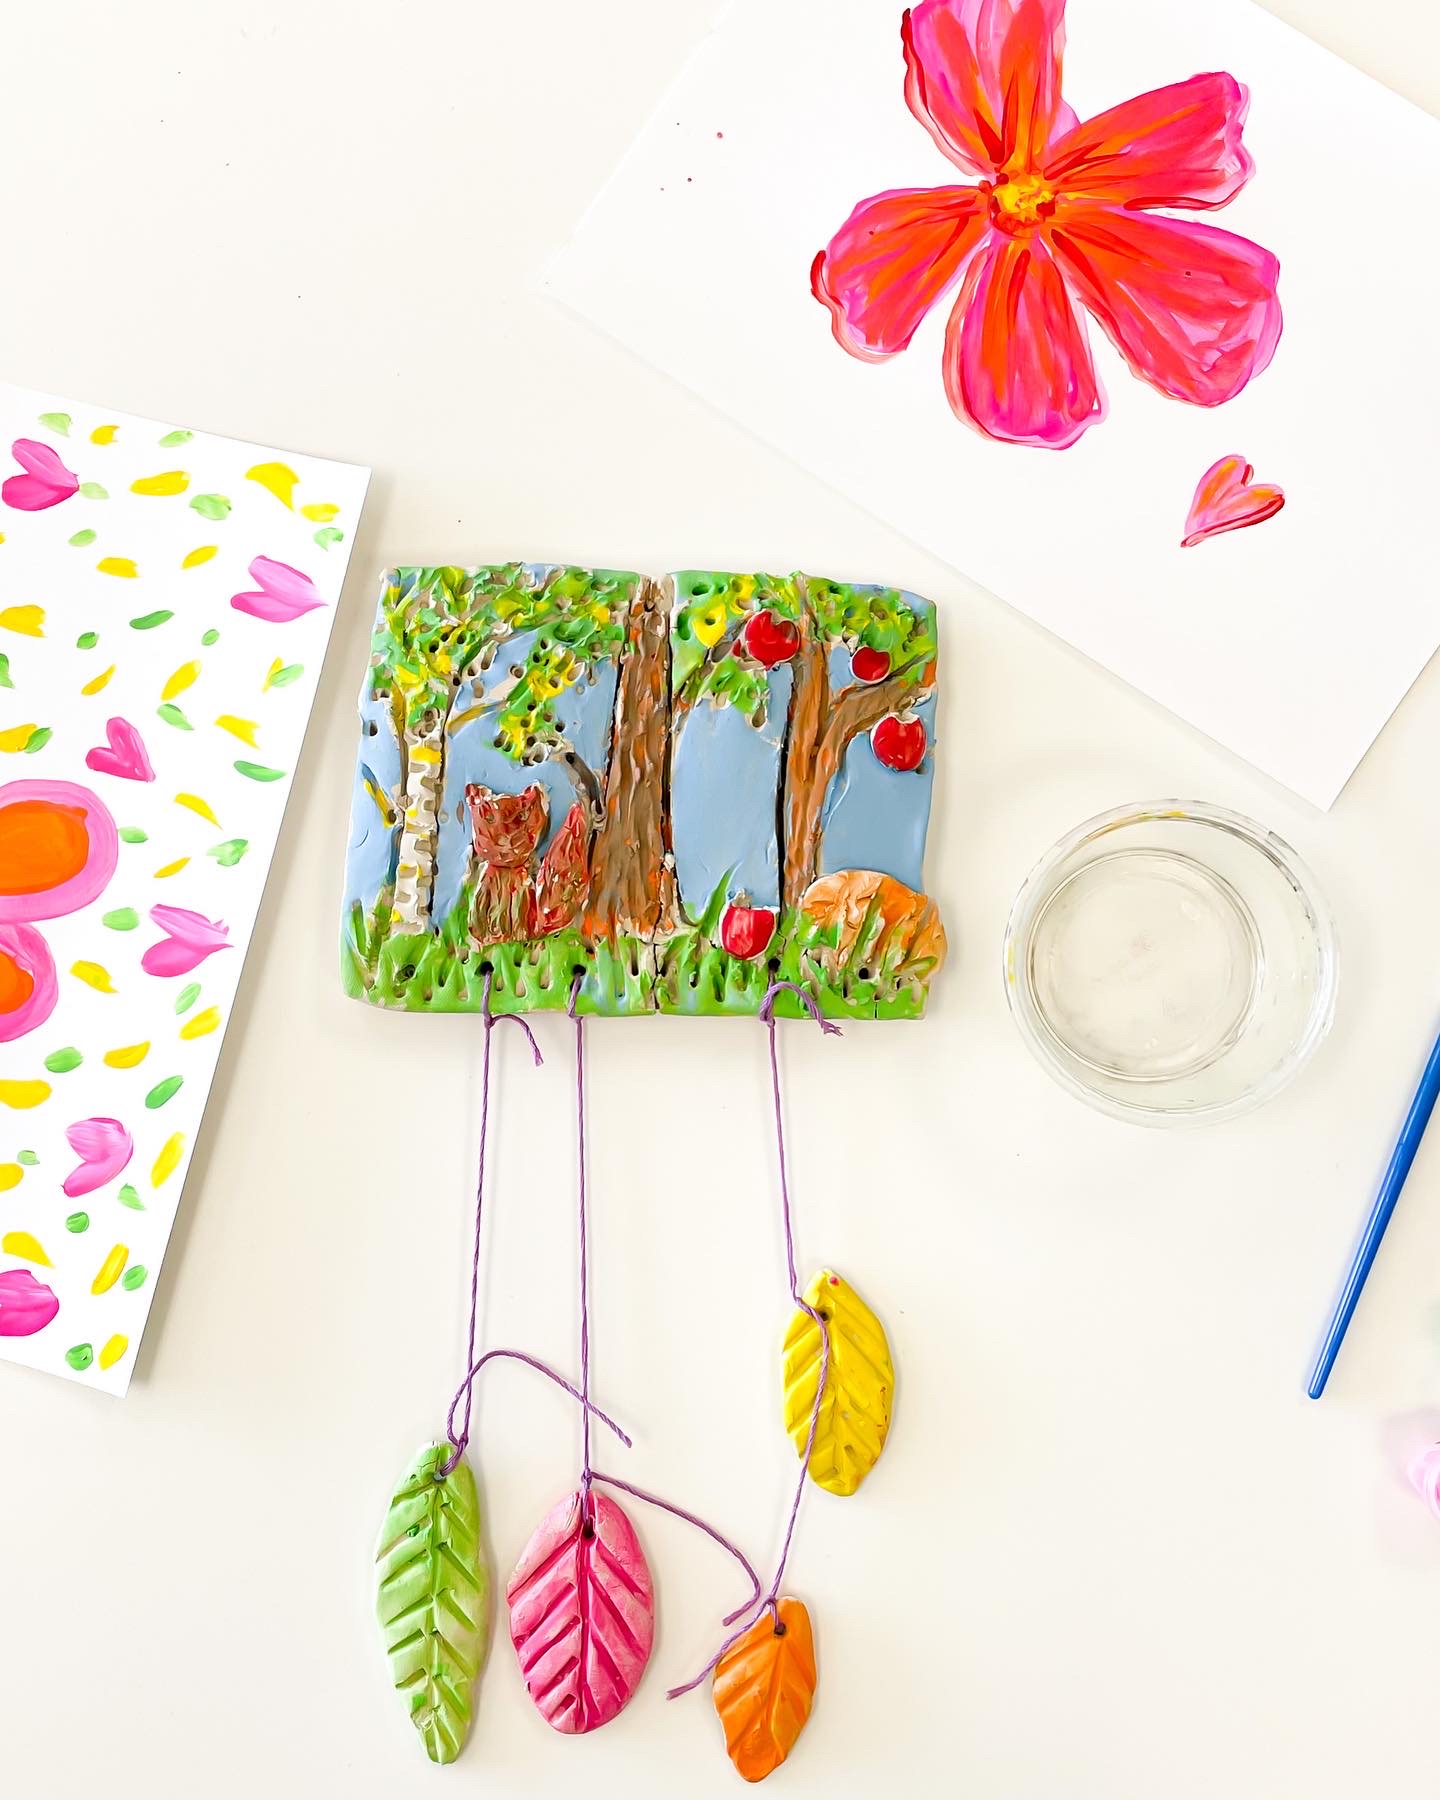 Sophisticated Art With Children's Art Supplies - OOLY